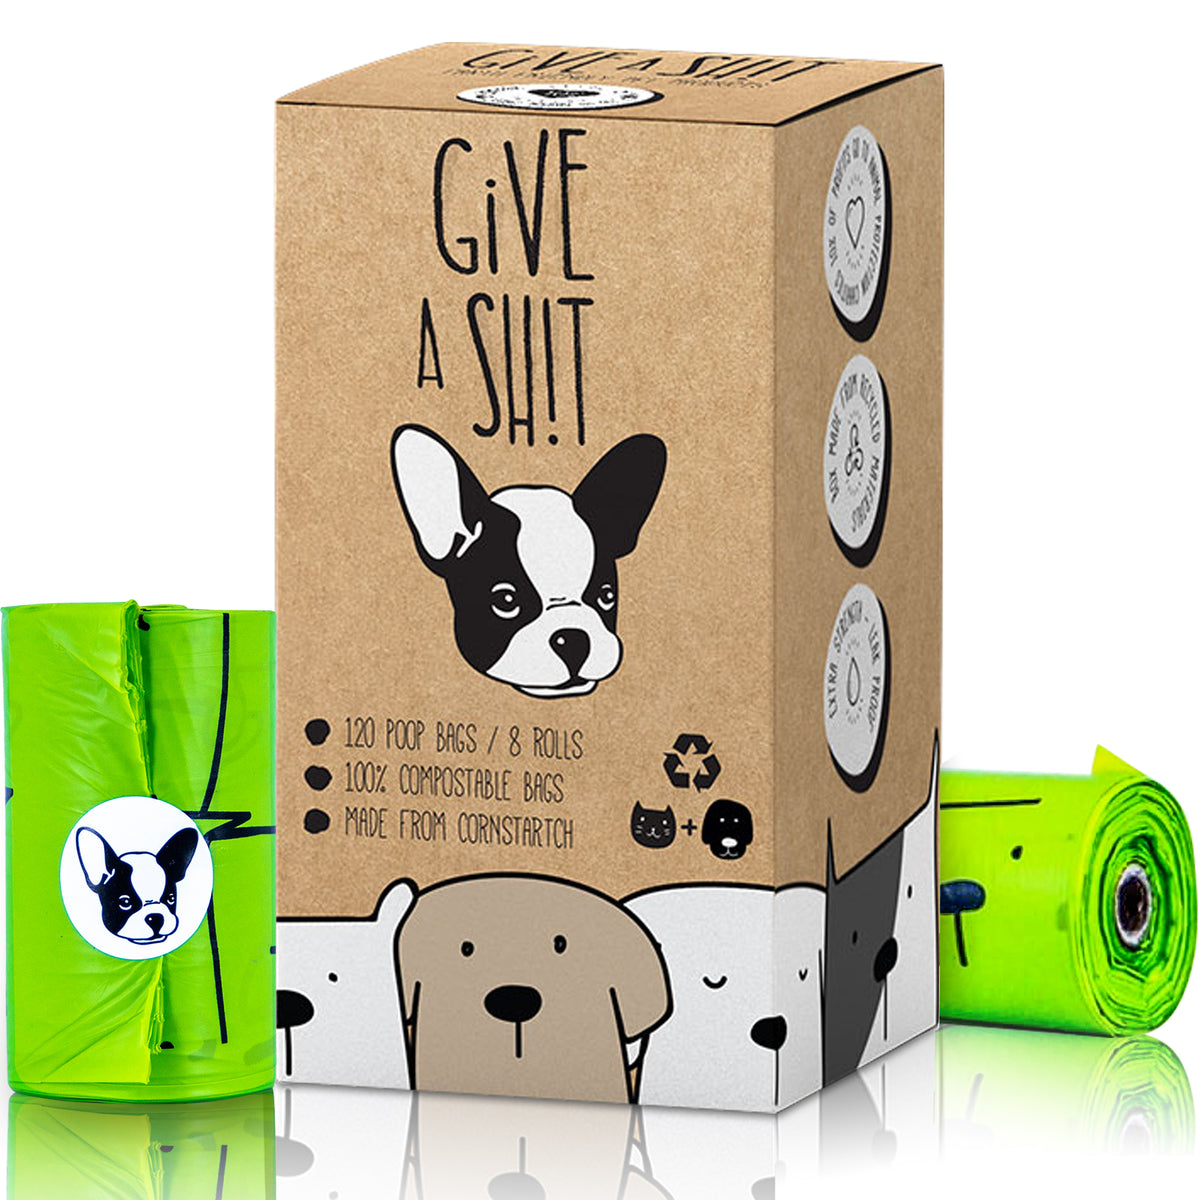 Eco-Friendly Dog Poop Bags (120-count)  Give a Shit: Plastic-Free – Give A  Shit - Earth Friendly Pet Products